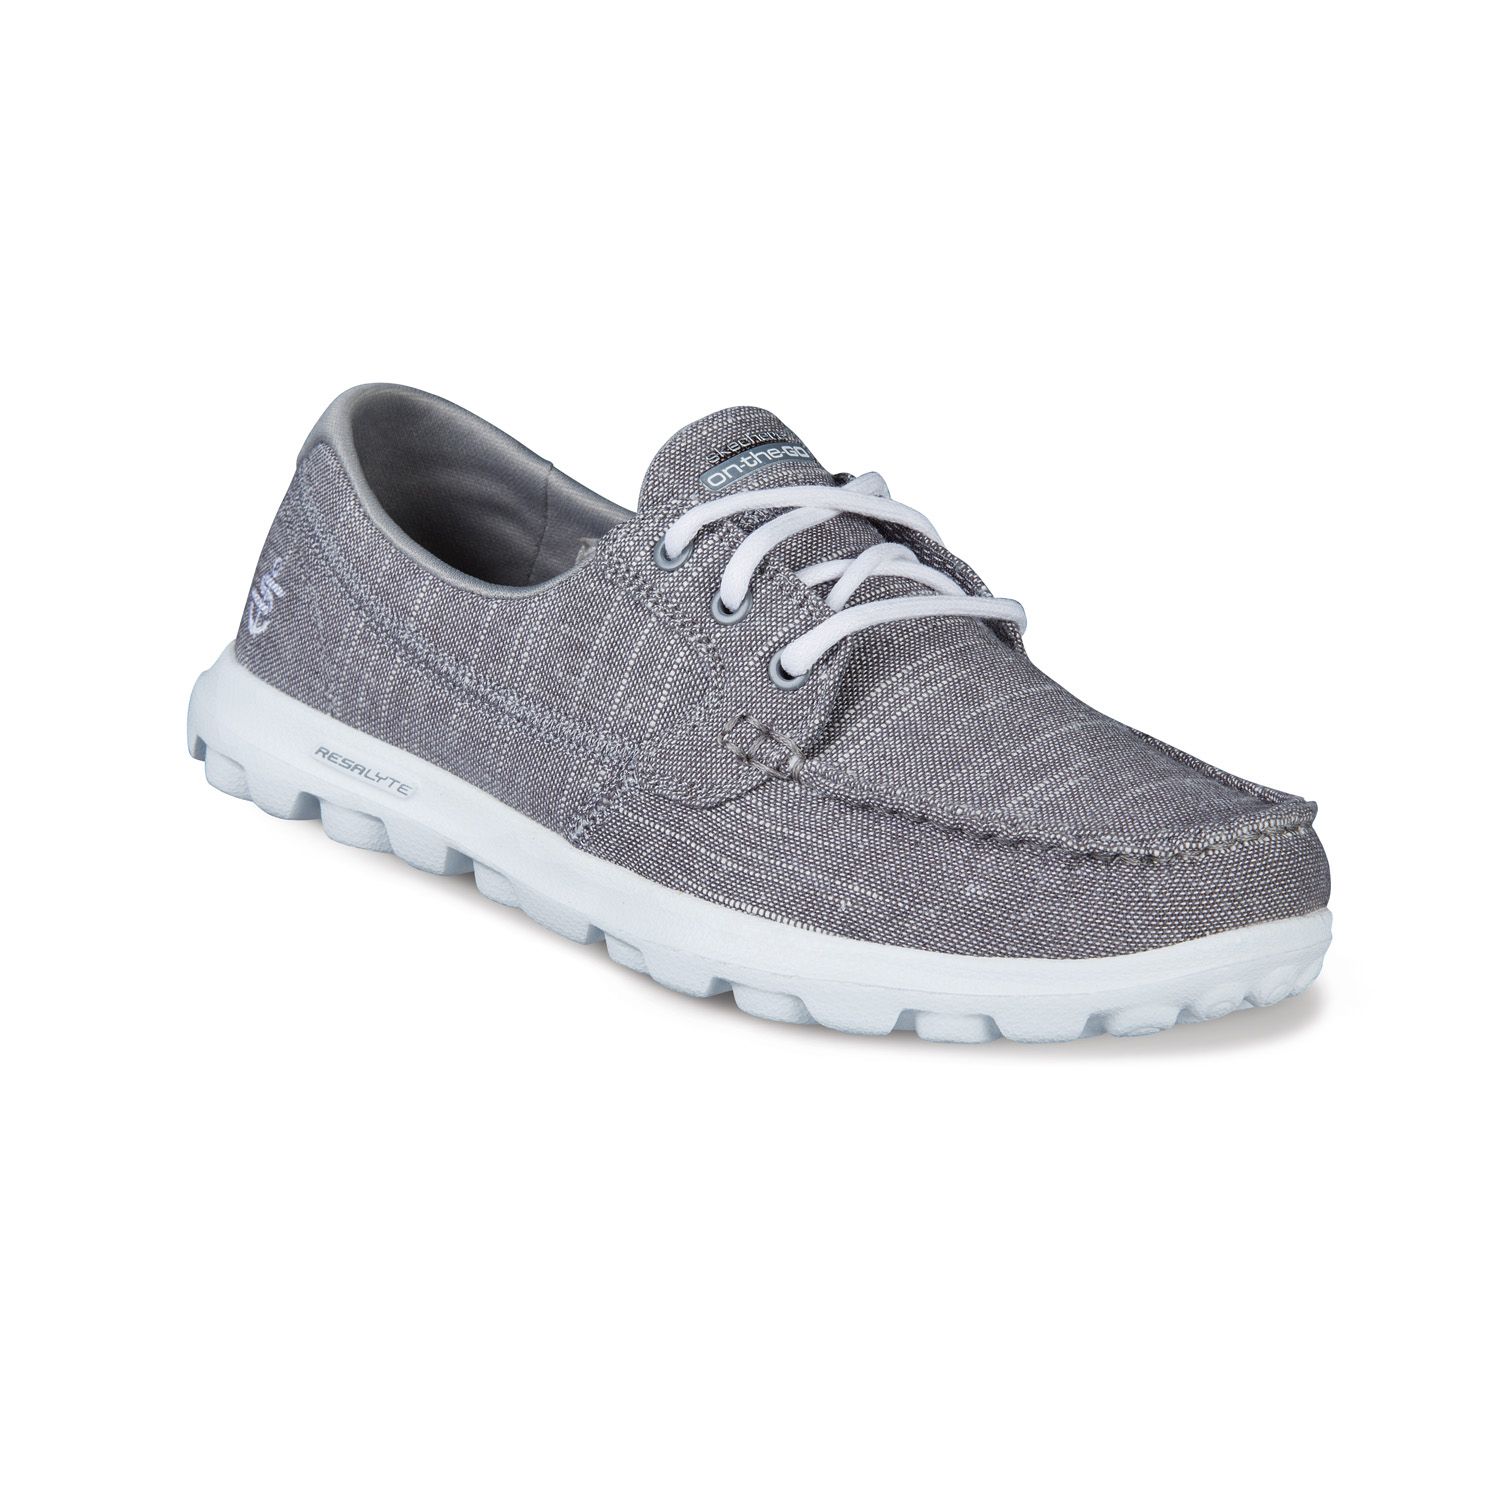 skechers on the go mist boat shoes